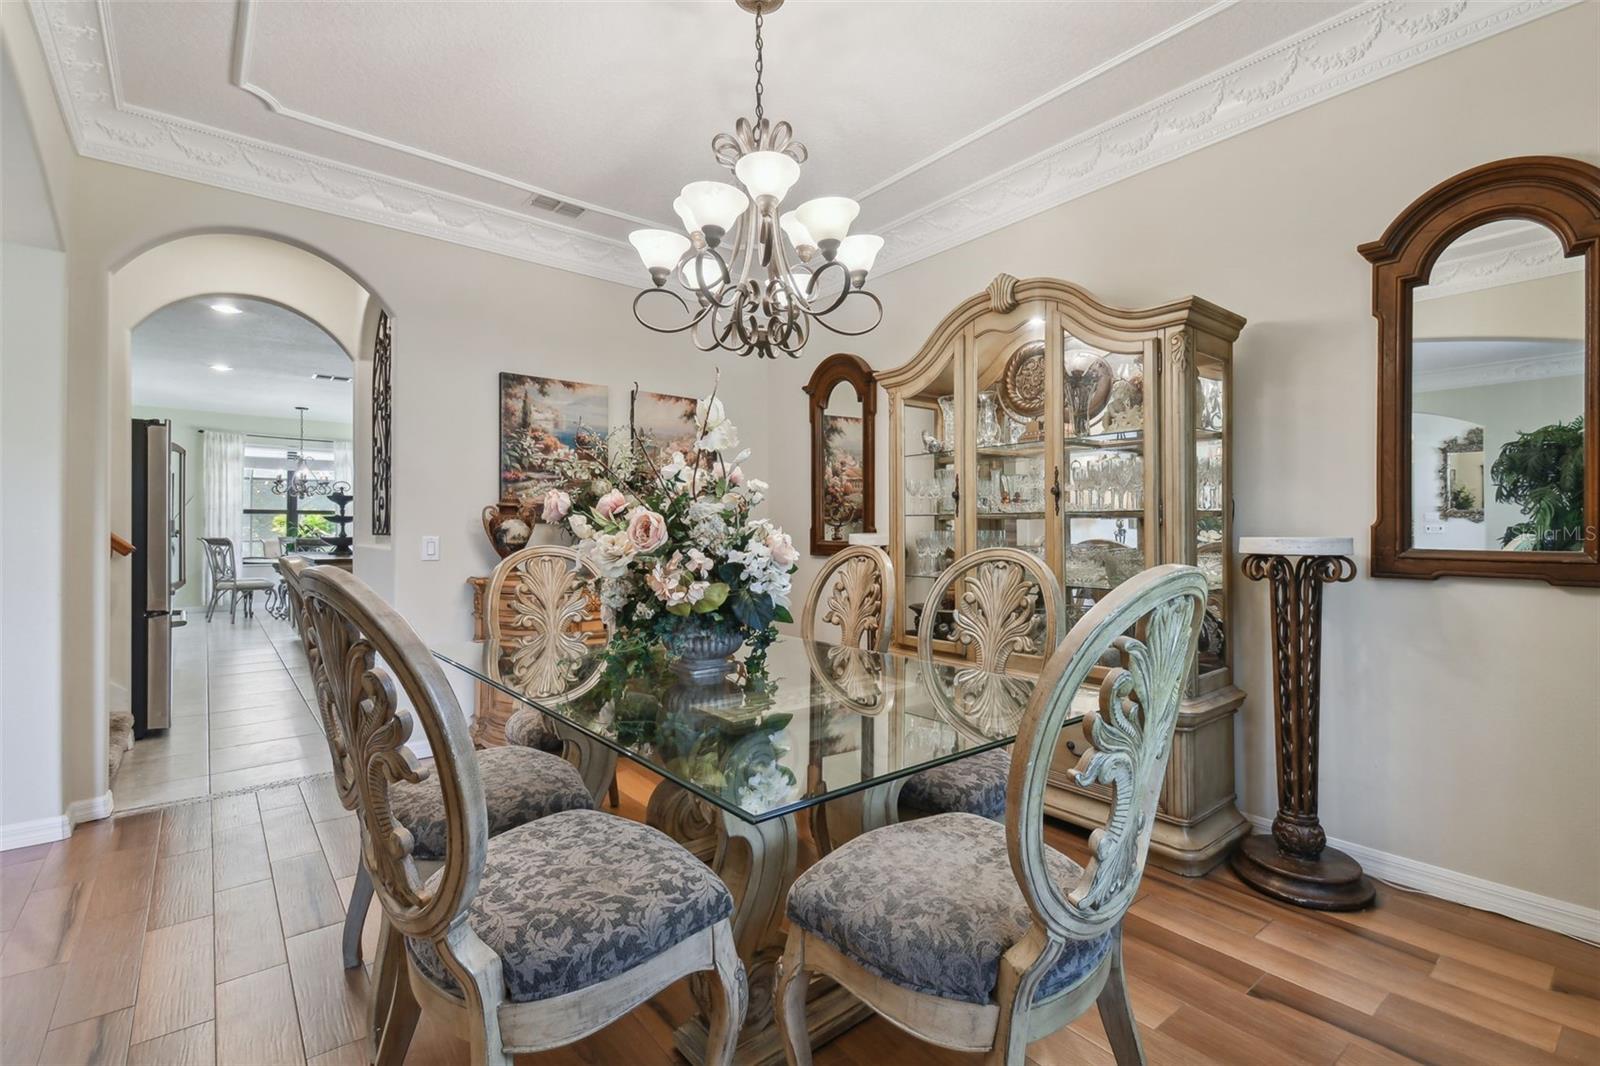 Formal dining room featuring extensive crown moulding